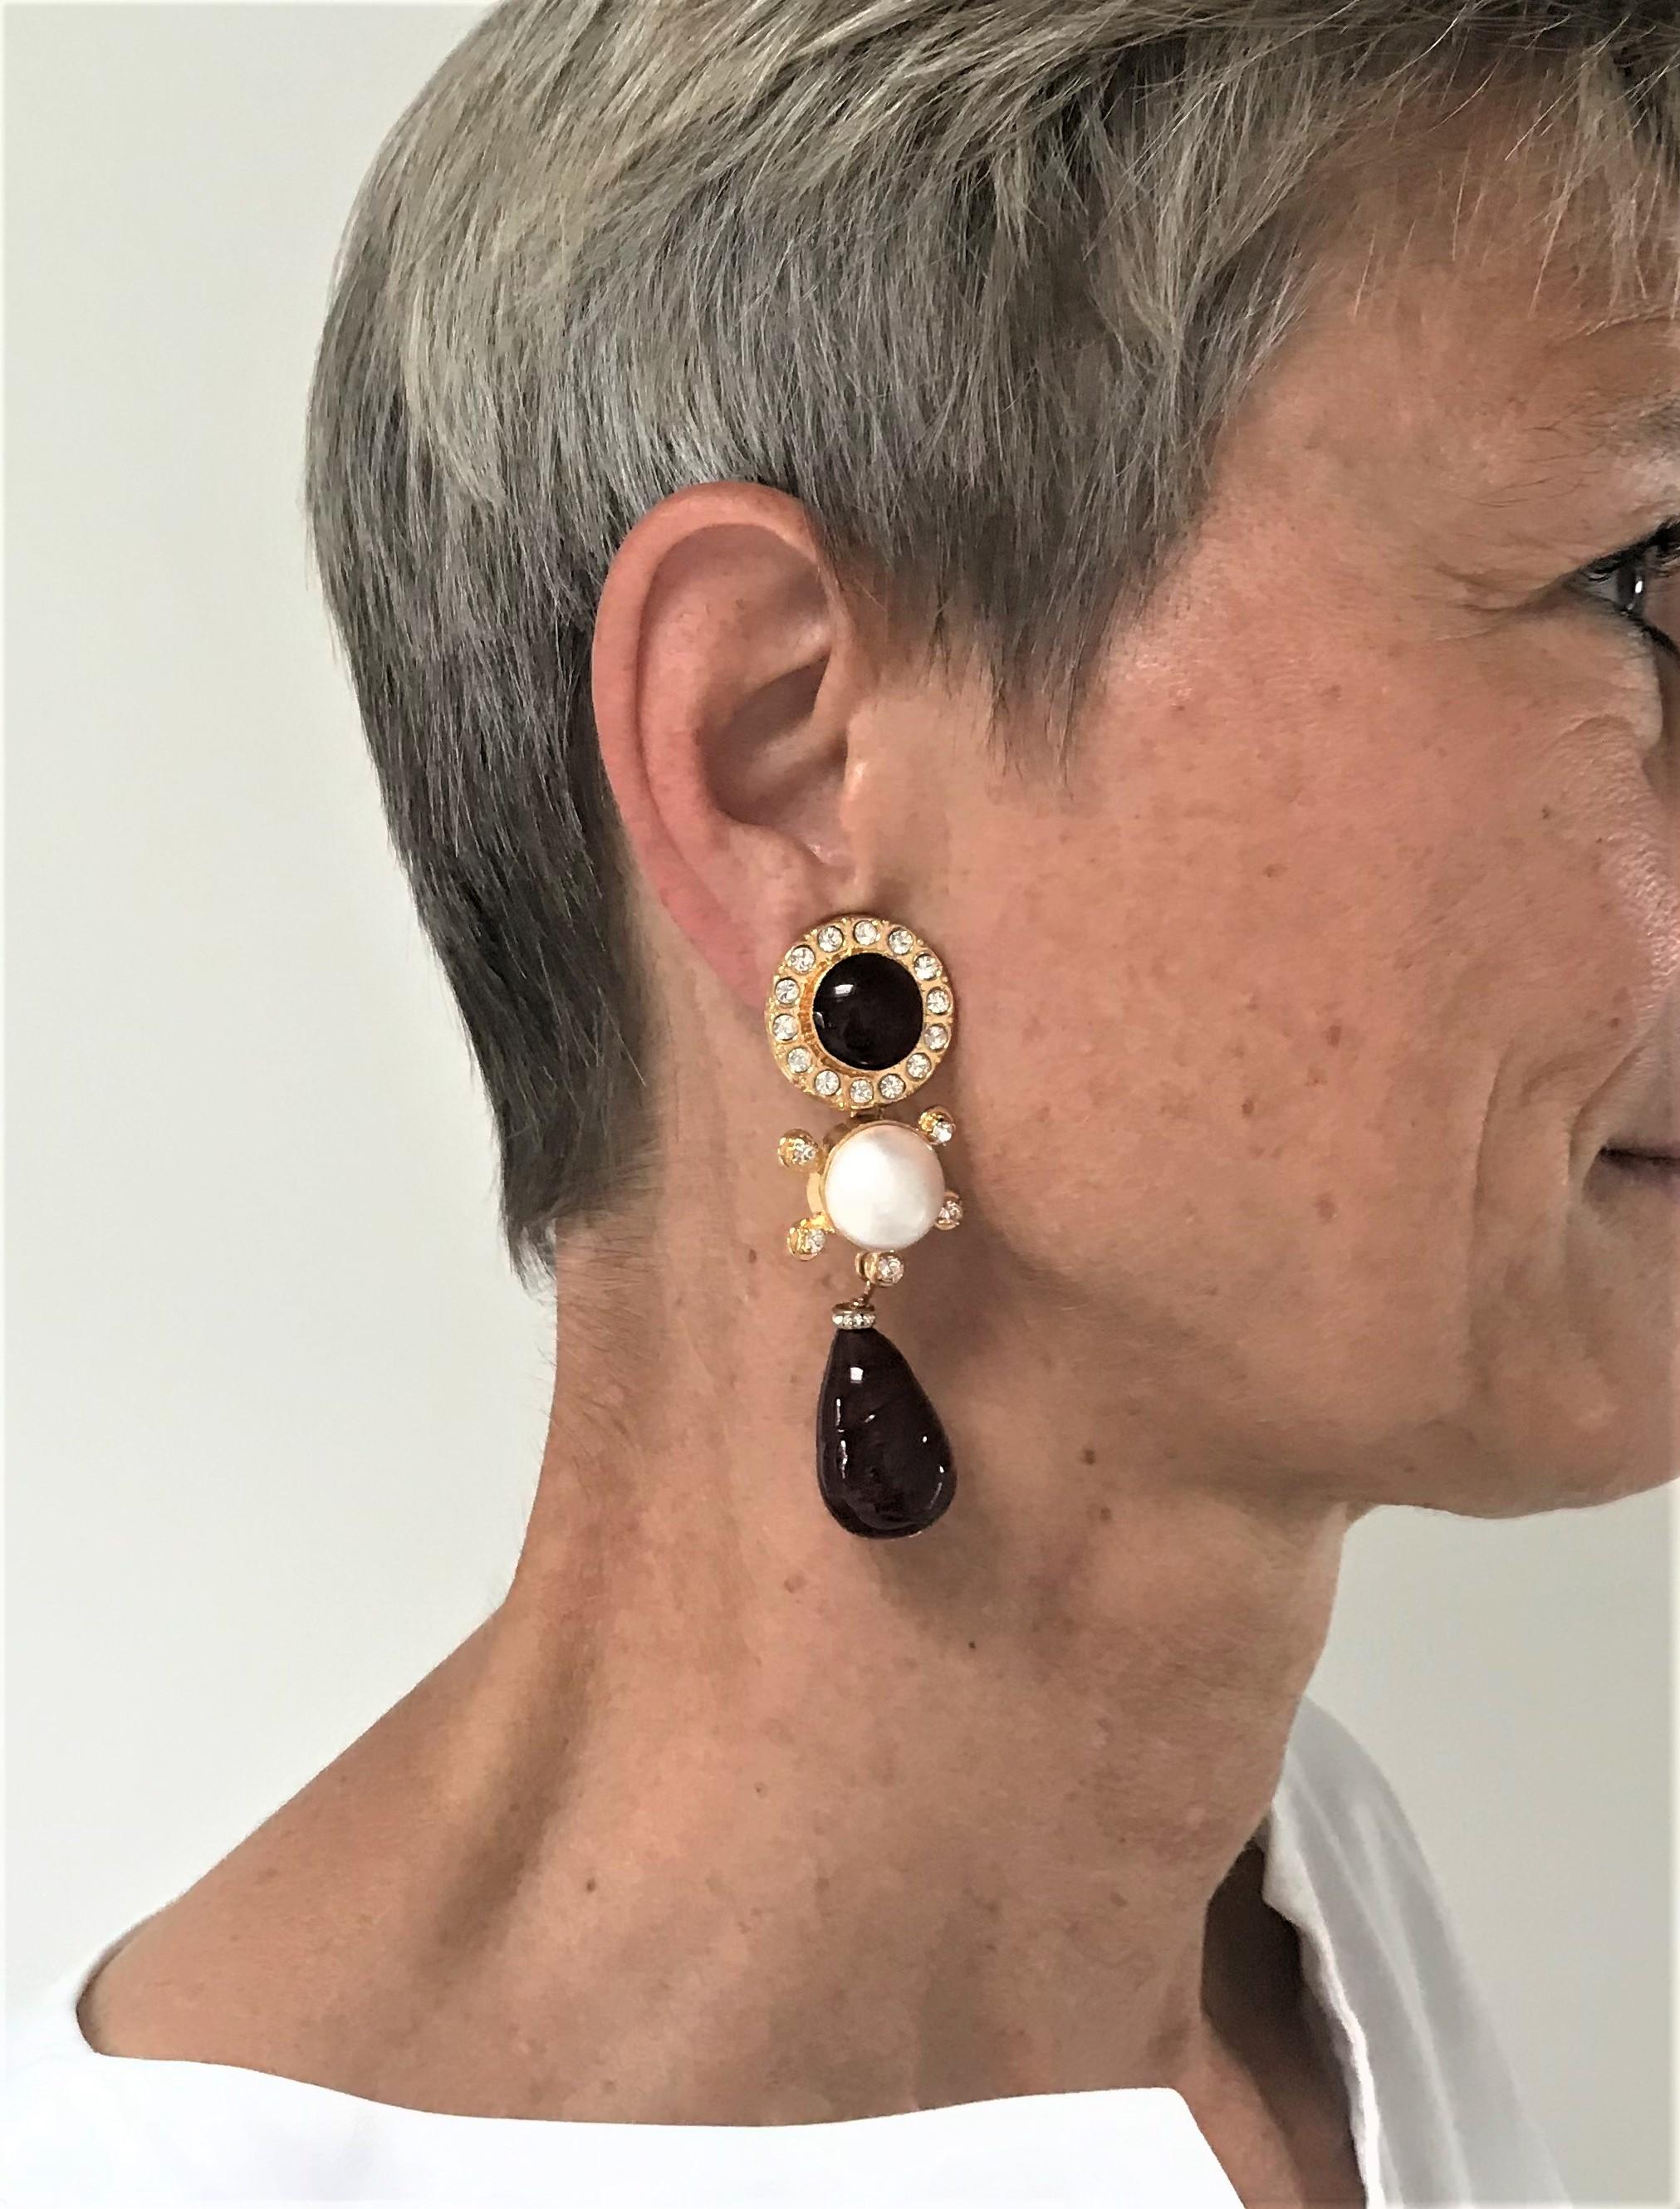 Exceptional Chanel ear clips consisting of 3 parts. Upper part with purple Gripoix glass stone and surrounded by small rhinestones. In the middle, beautiful faux pearl with 5 set rhinestones, hanging from it 2,5 cm red Gripoix drops. Signed from the